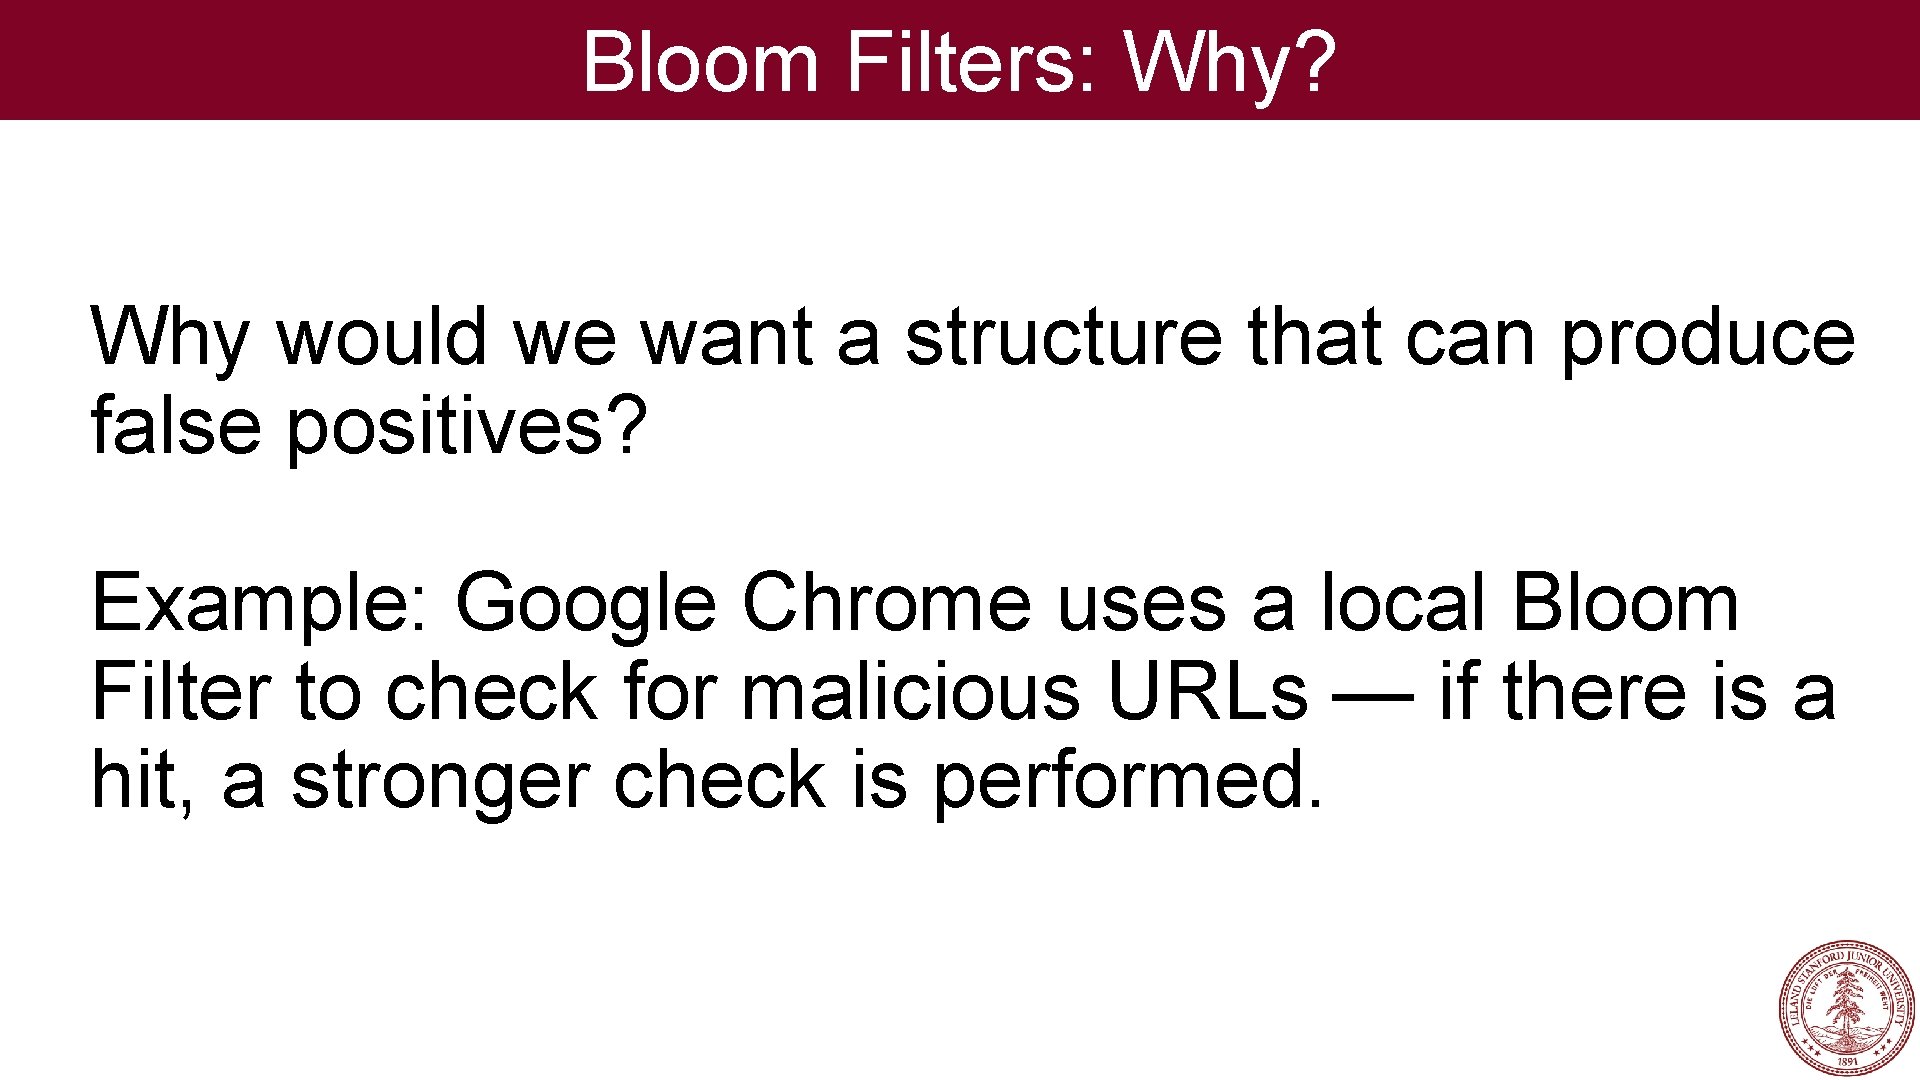 Bloom Filters: Why? Why would we want a structure that can produce false positives?